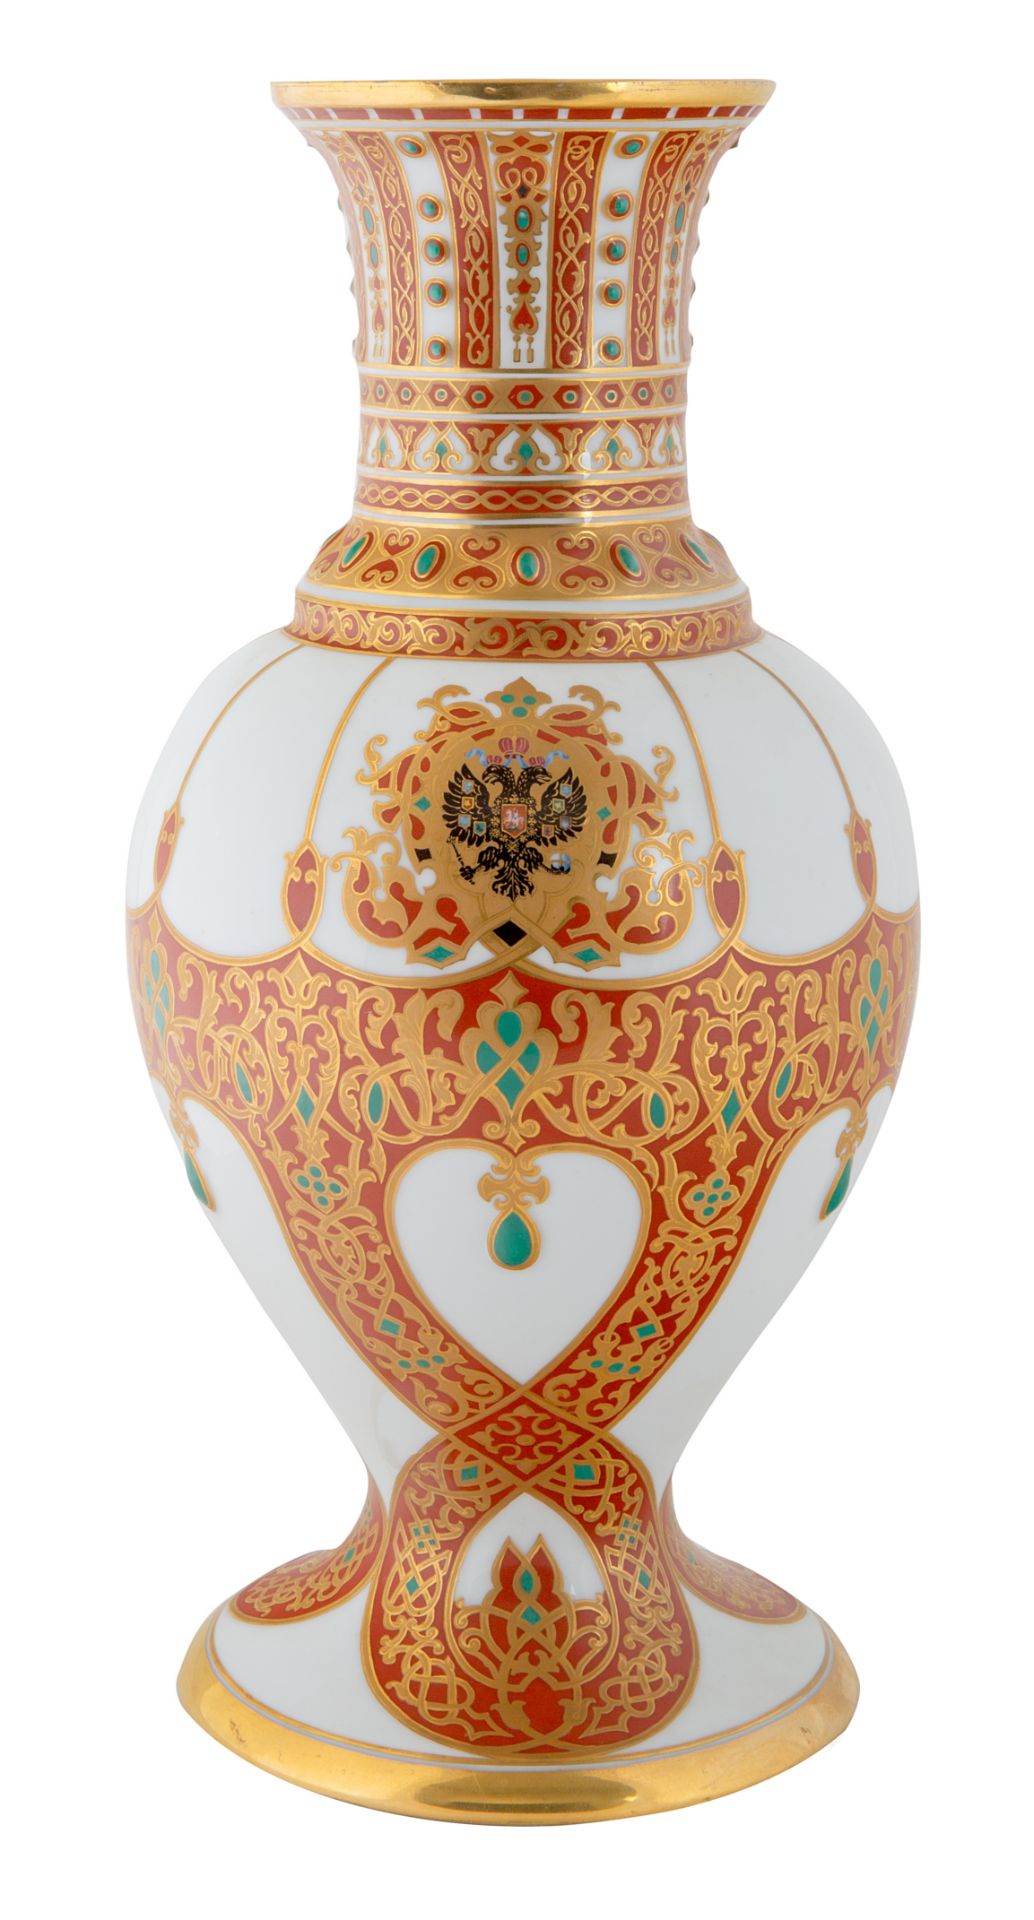 A RUSSIAN PORCELAIN VASE WITH MOSCOW BLAZON, IMPERIAL PORCELAIN FACTORY, ST. PETERSBURG, PERIOD OF N